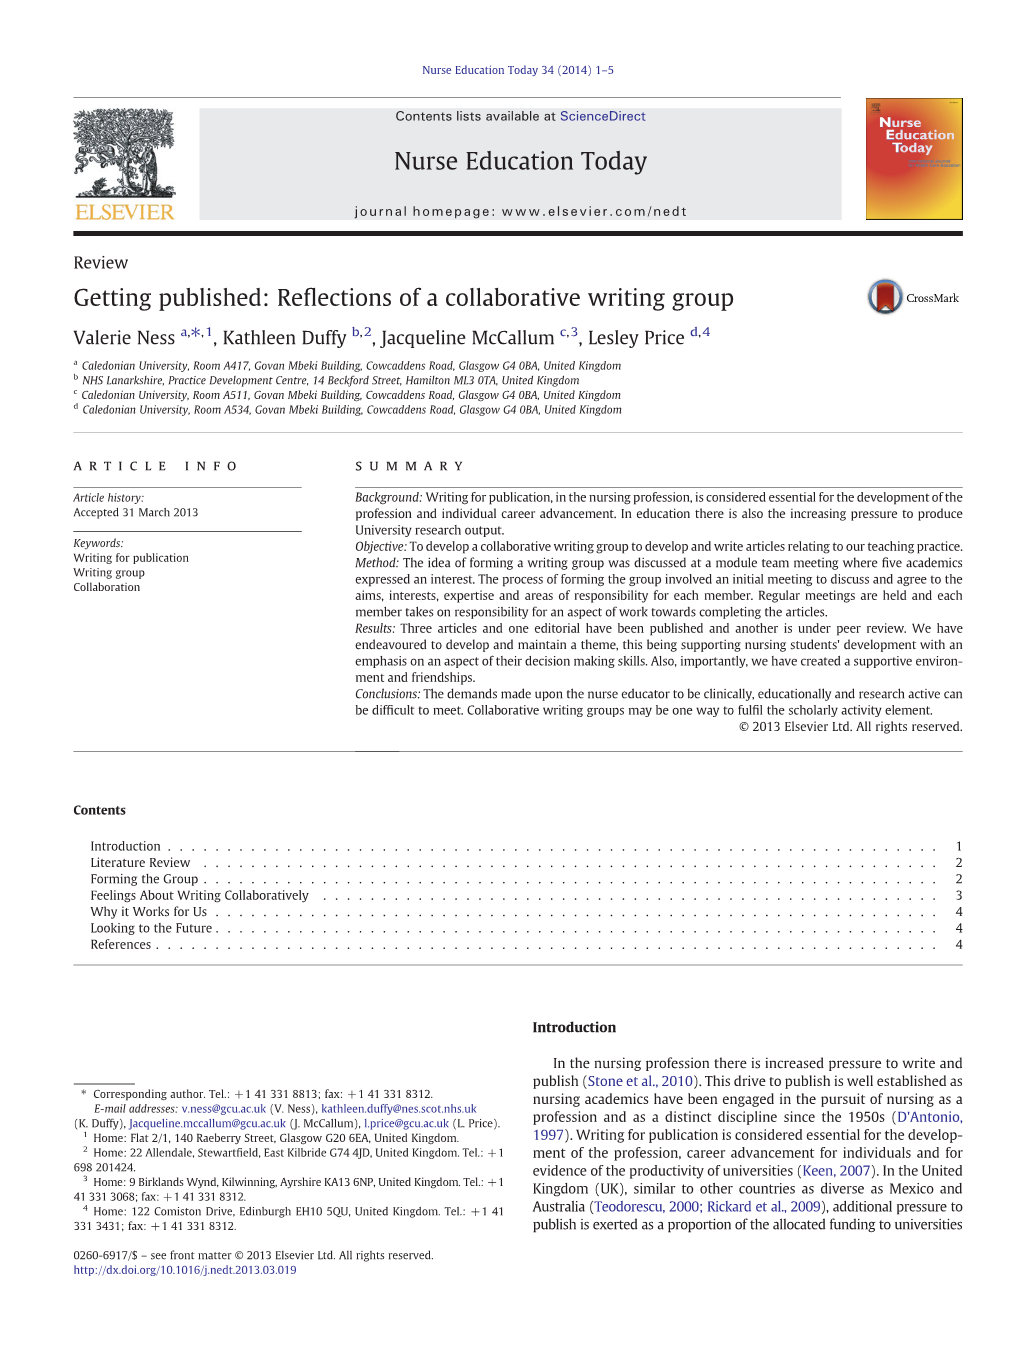 Getting Published: Reflections of a Collaborative Writing Group